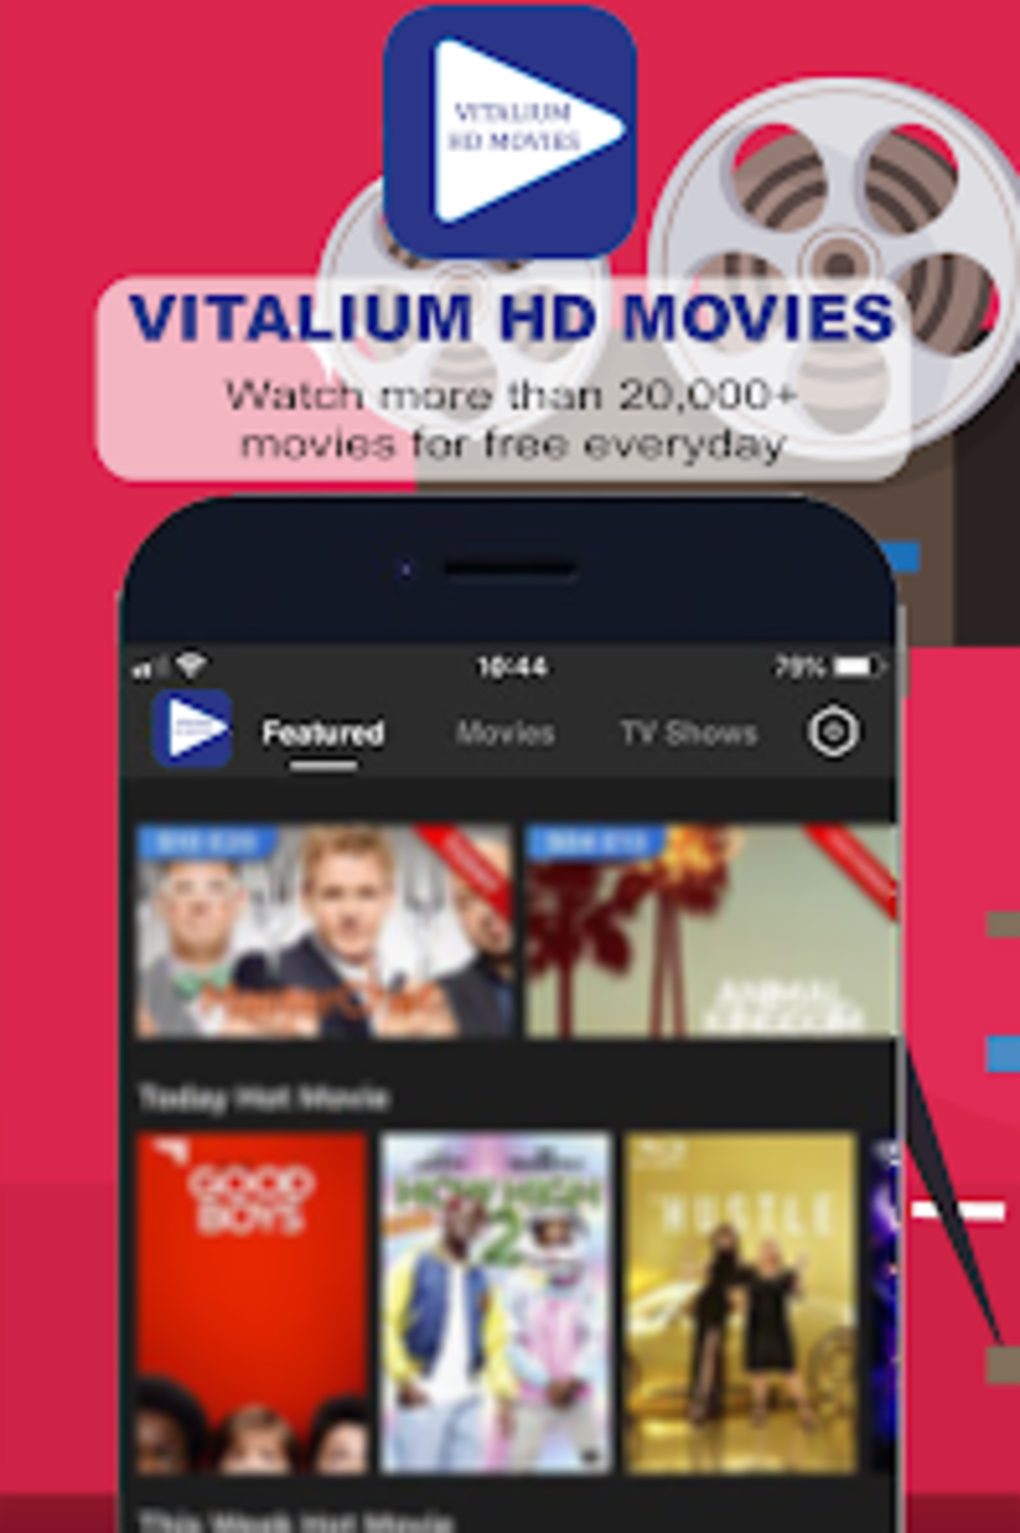 HD Movies 2024 for Android Download